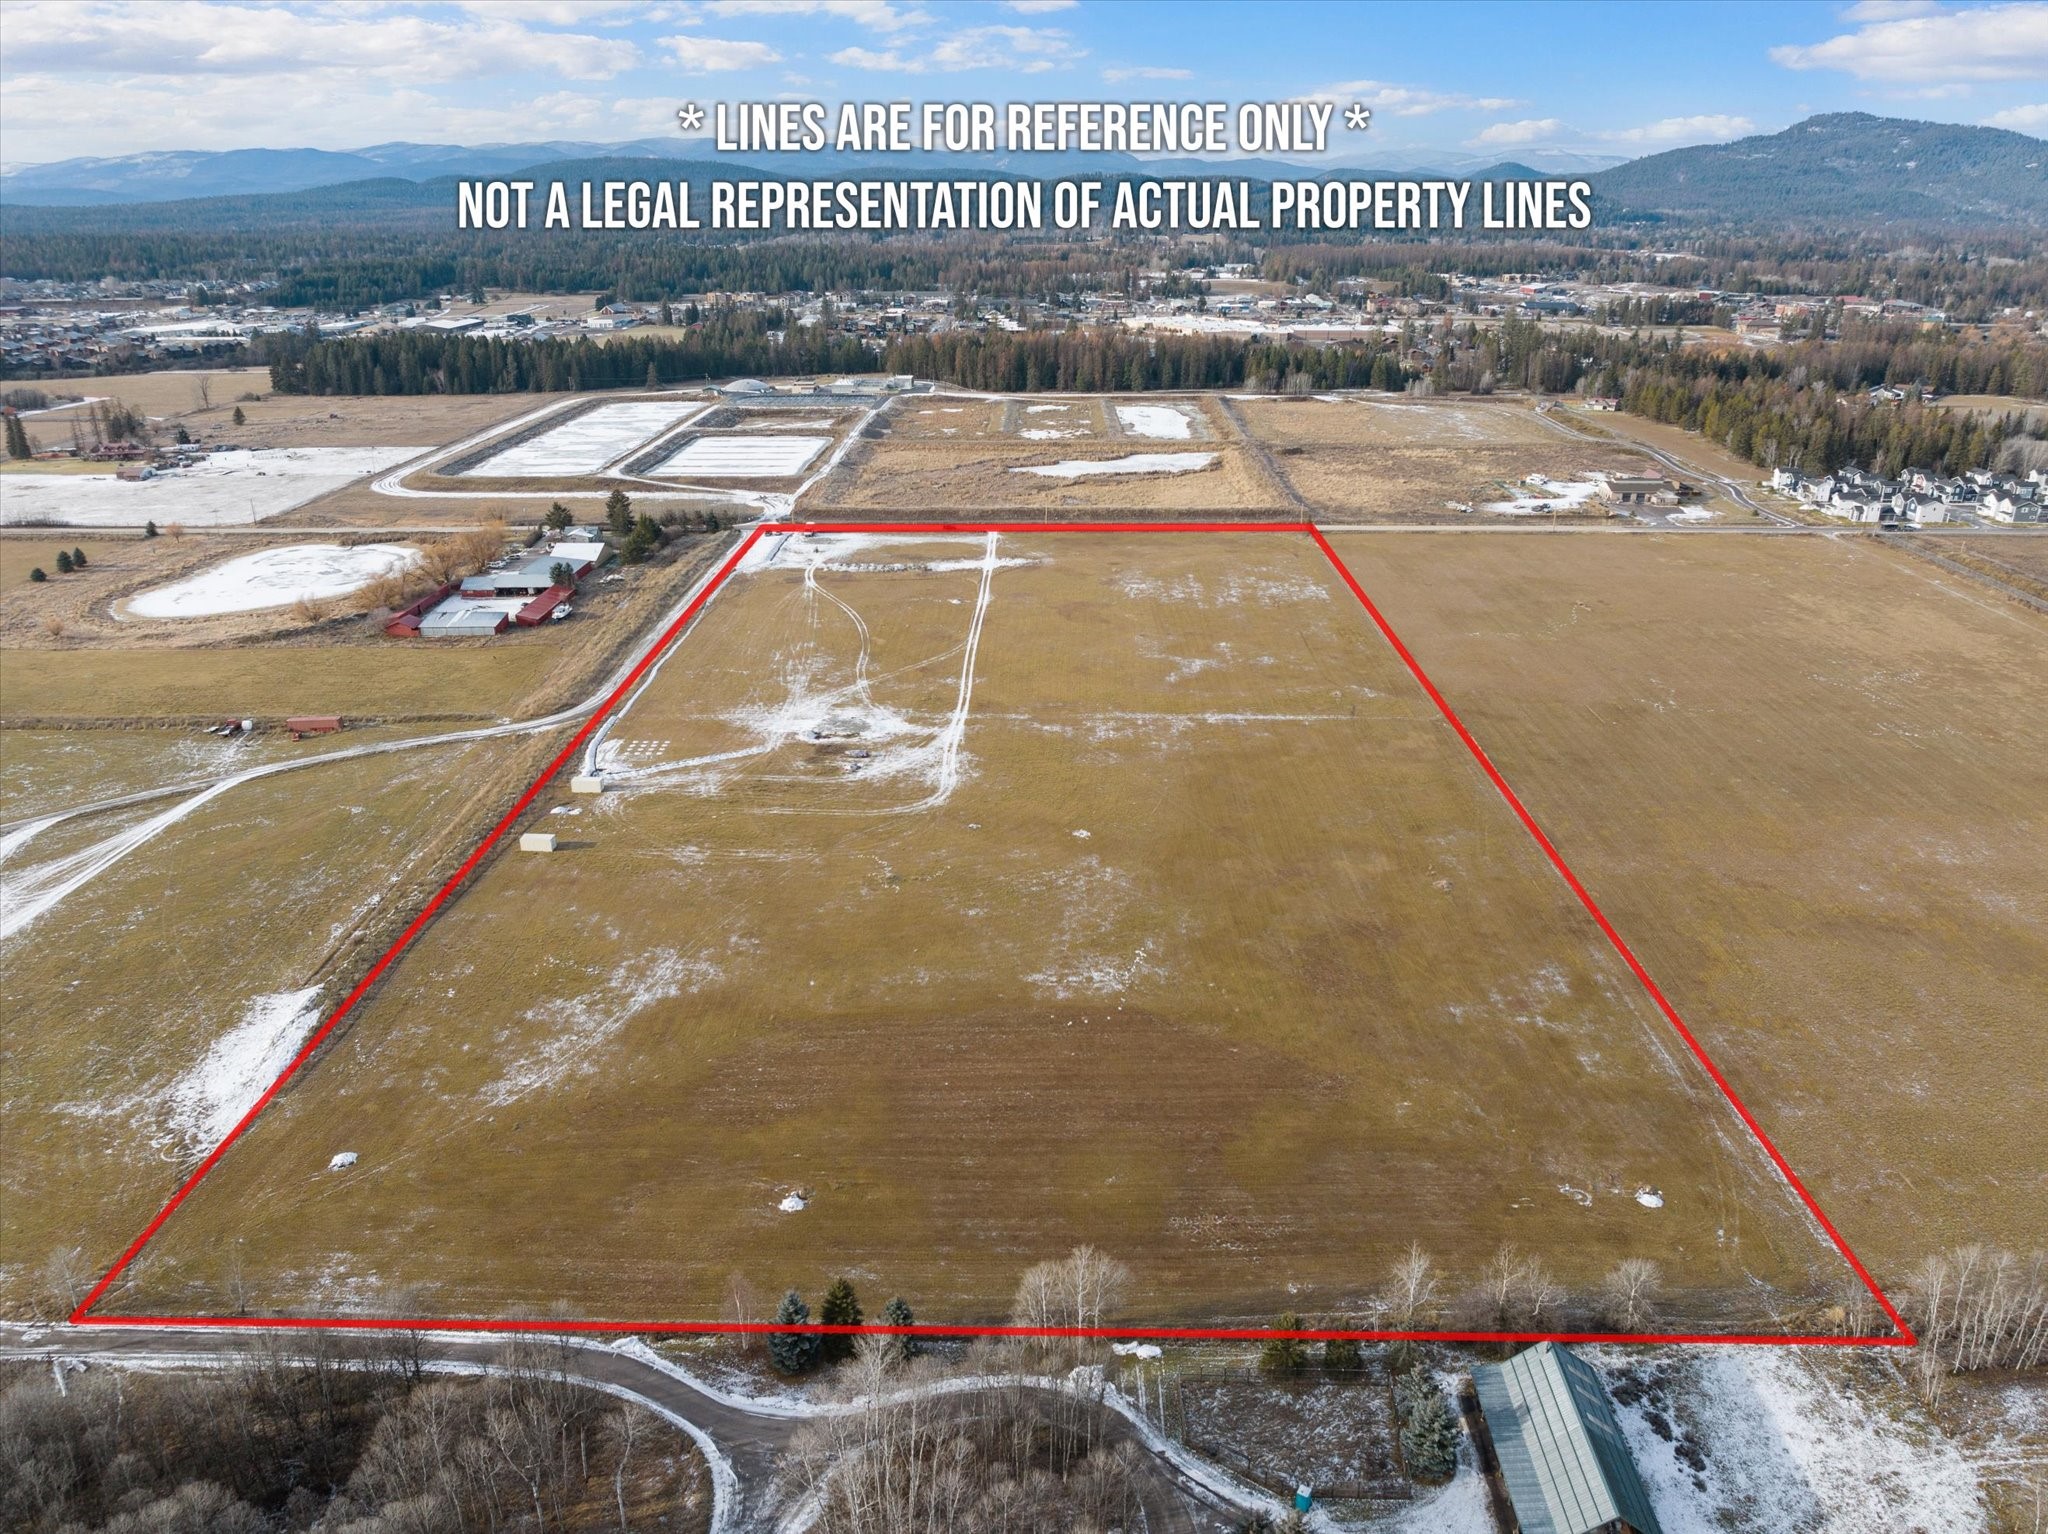 Positioned on the outskirts of Whitefish, these 20-level acres, just a mile from schools and two miles from downtown, hold significant residential development potential. With sweeping views of Whitefish Mountain Ski Resort and the Swan Mountain Range, this property should align seamlessly with the town's updating of its current growth policy. Ideal for future residential projects, this parcel comes with essential utilities nearby, including natural gas, electricity, telephone, fiber optics, cable TV, city water, and city sewer. This land serves as a strategic investment opportunity within Whitefish's evolving landscape. (Vision Whitefish 2045: the update and revision of the city growth policy needs to be completed by the end of May 2026) The Property is currently Zoned SAG-10 and in the county, not within the city limits of Whitefish. Some neighboring properties have been annexed into the City of Whitefish. This land is also ideal for an Estate or equestrian-oriented property. The owner plans to build a 30' X 48' x 16' Shop/RV Garage/Toy Barn on the Southwest corner of the lot. Construction will start in July 2024. The Owner also plans to install the septic and drain fields for the 5-bedroom main home and the 3-bedroom guest home this summer. (see documents fo r the 2019 approved septic design and layout)